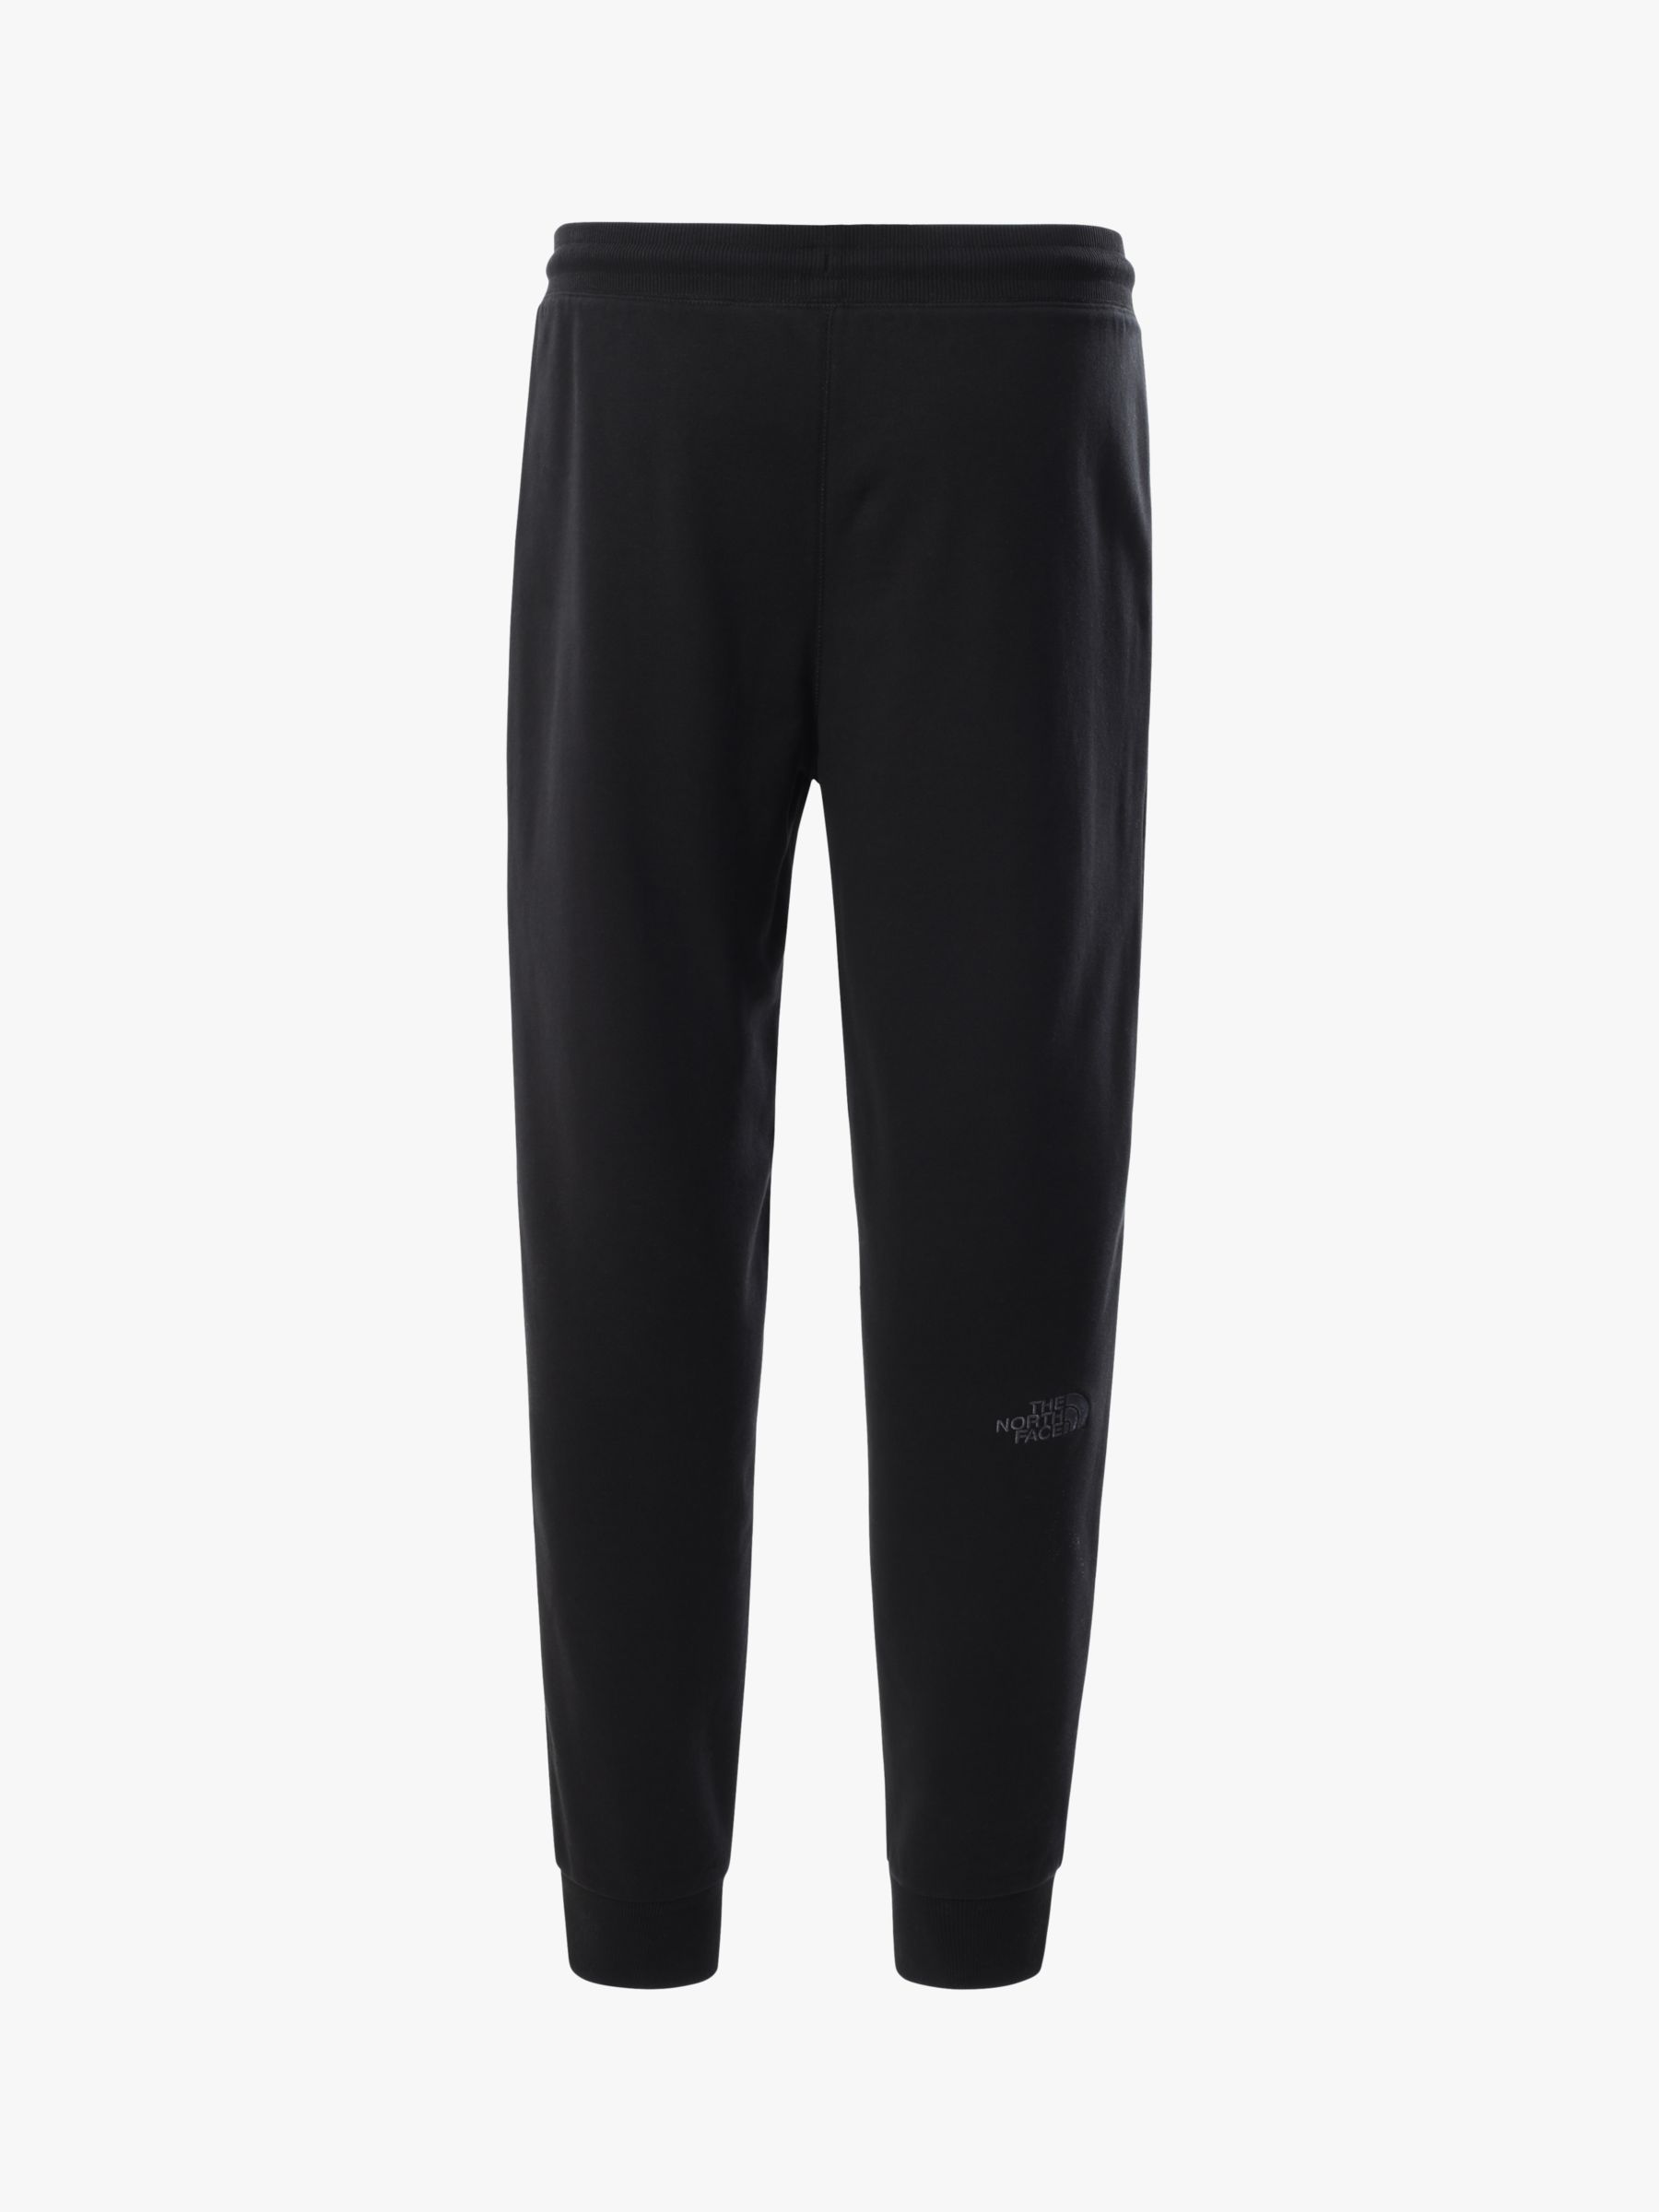 Buy The North Face NSE Light Joggers Online at johnlewis.com